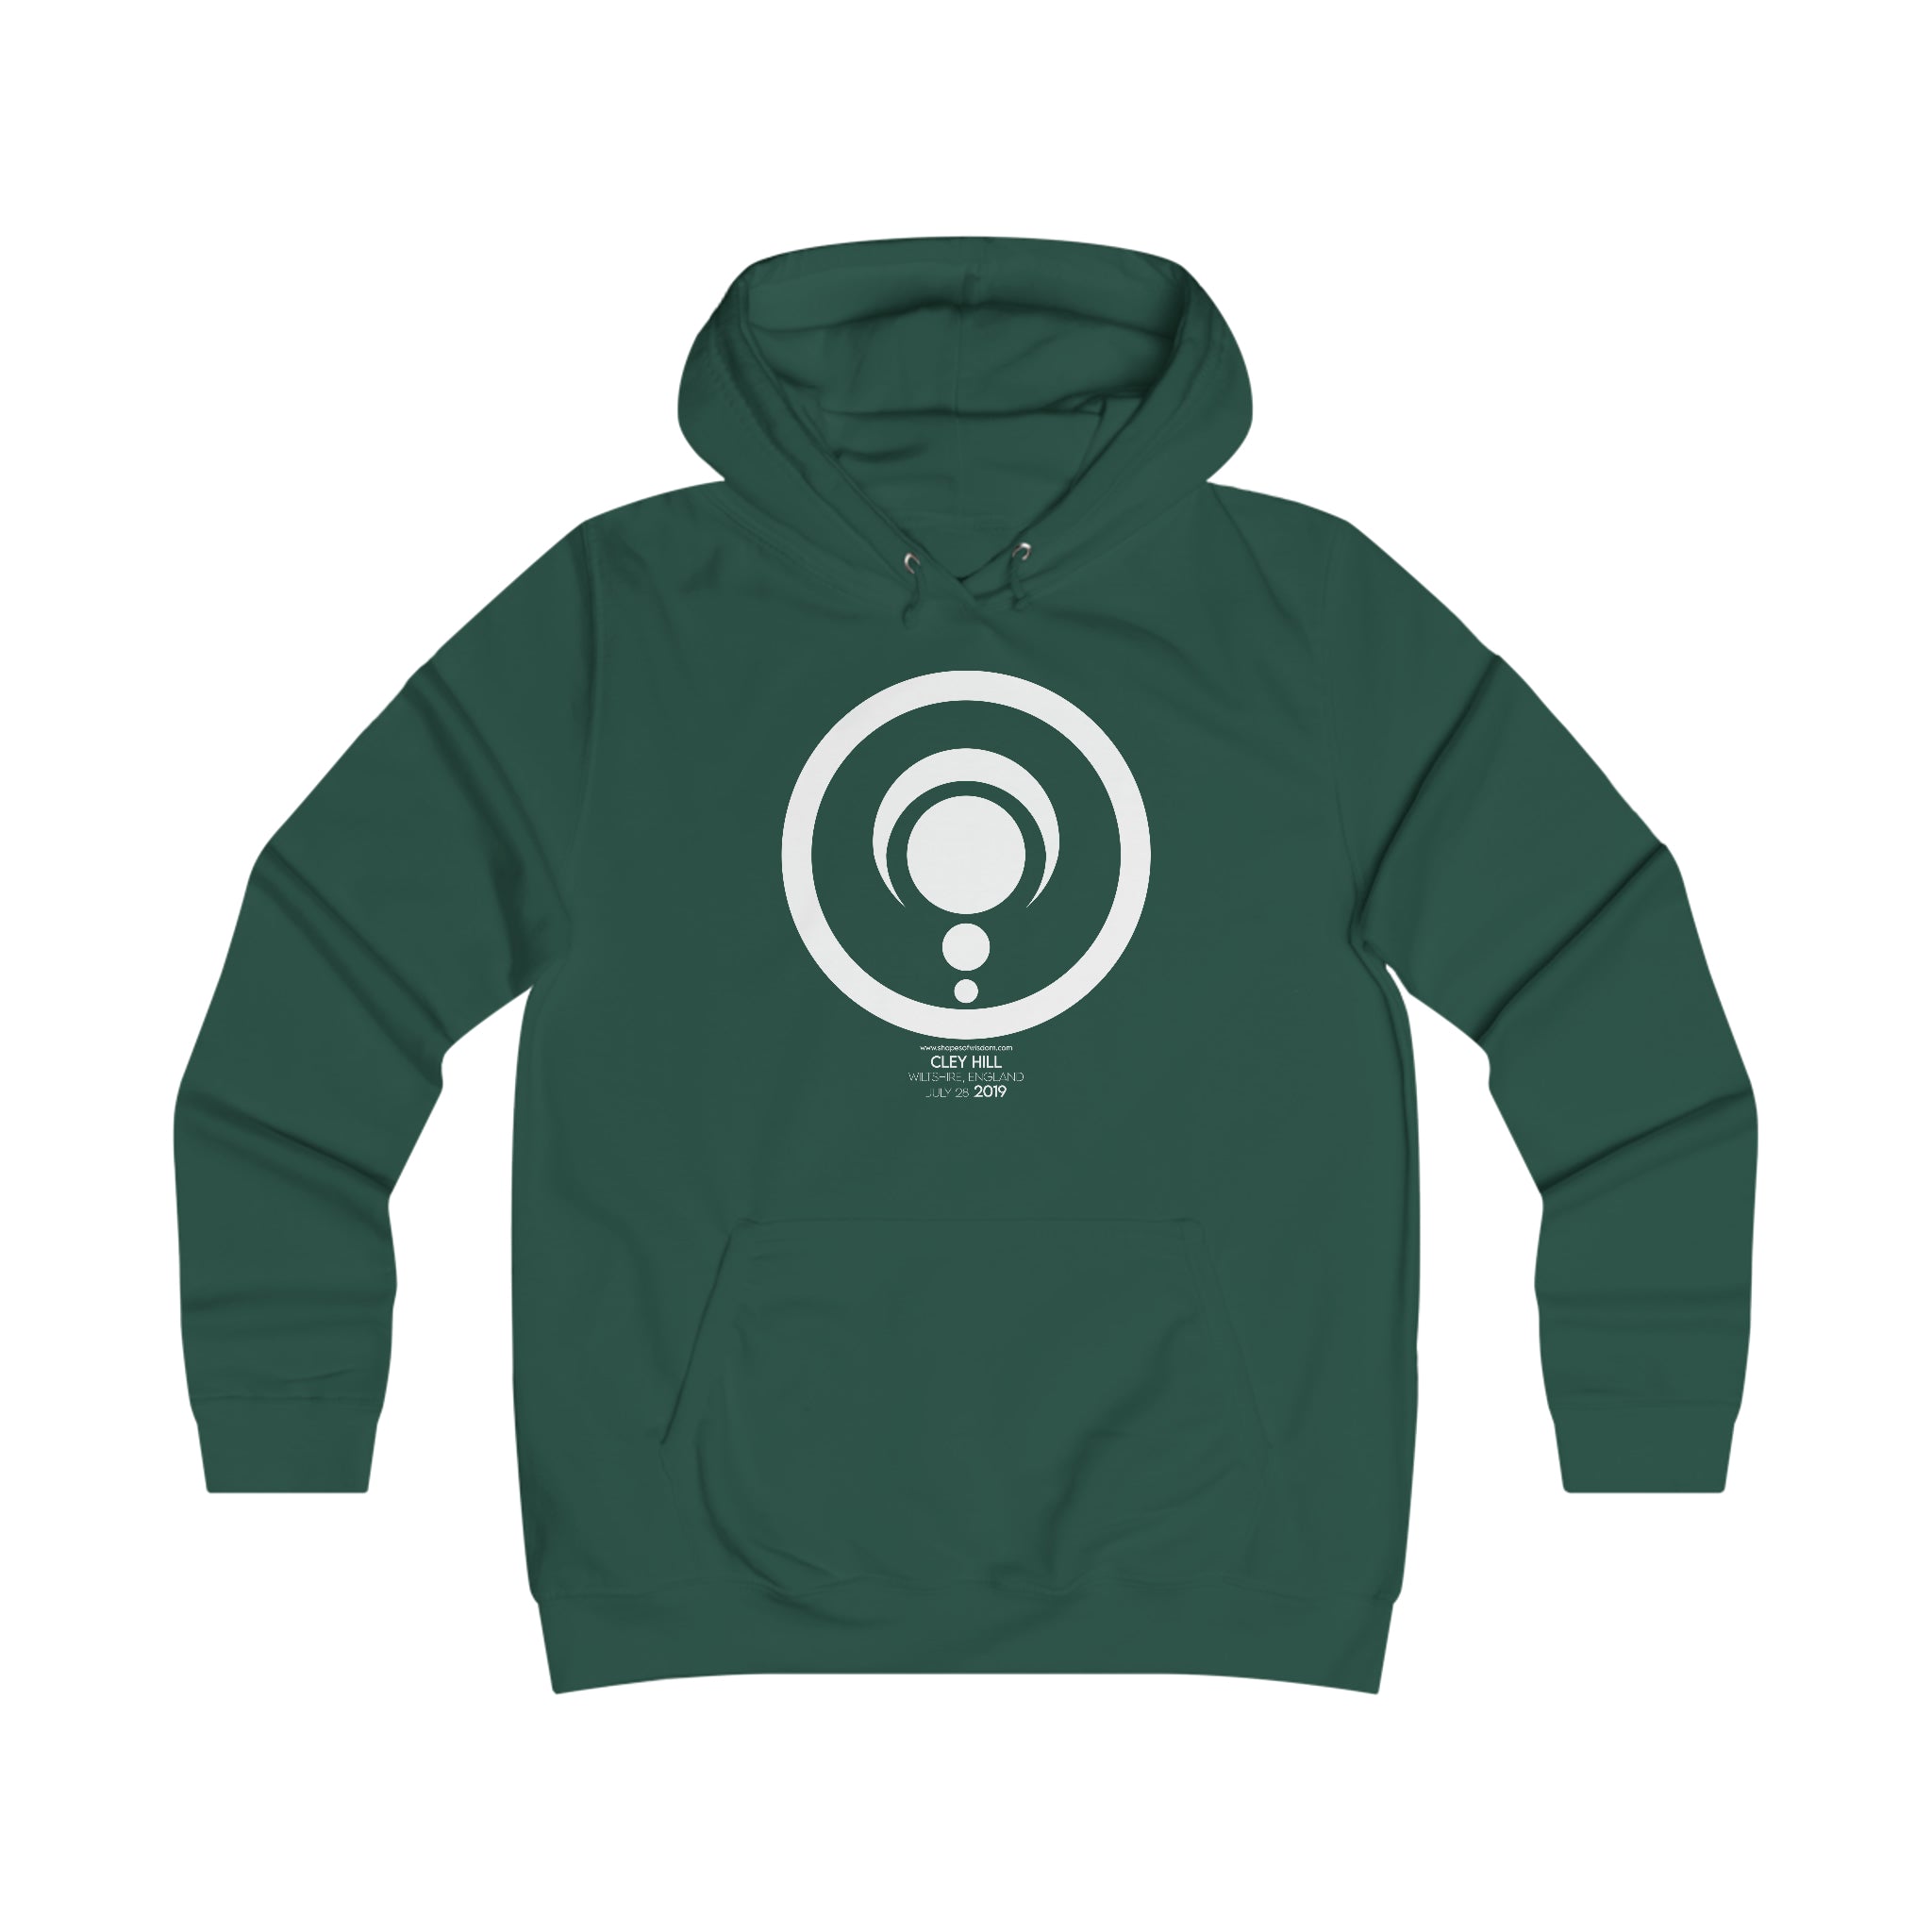 Crop Circle Girl College Hoodie - Cley Hill 3